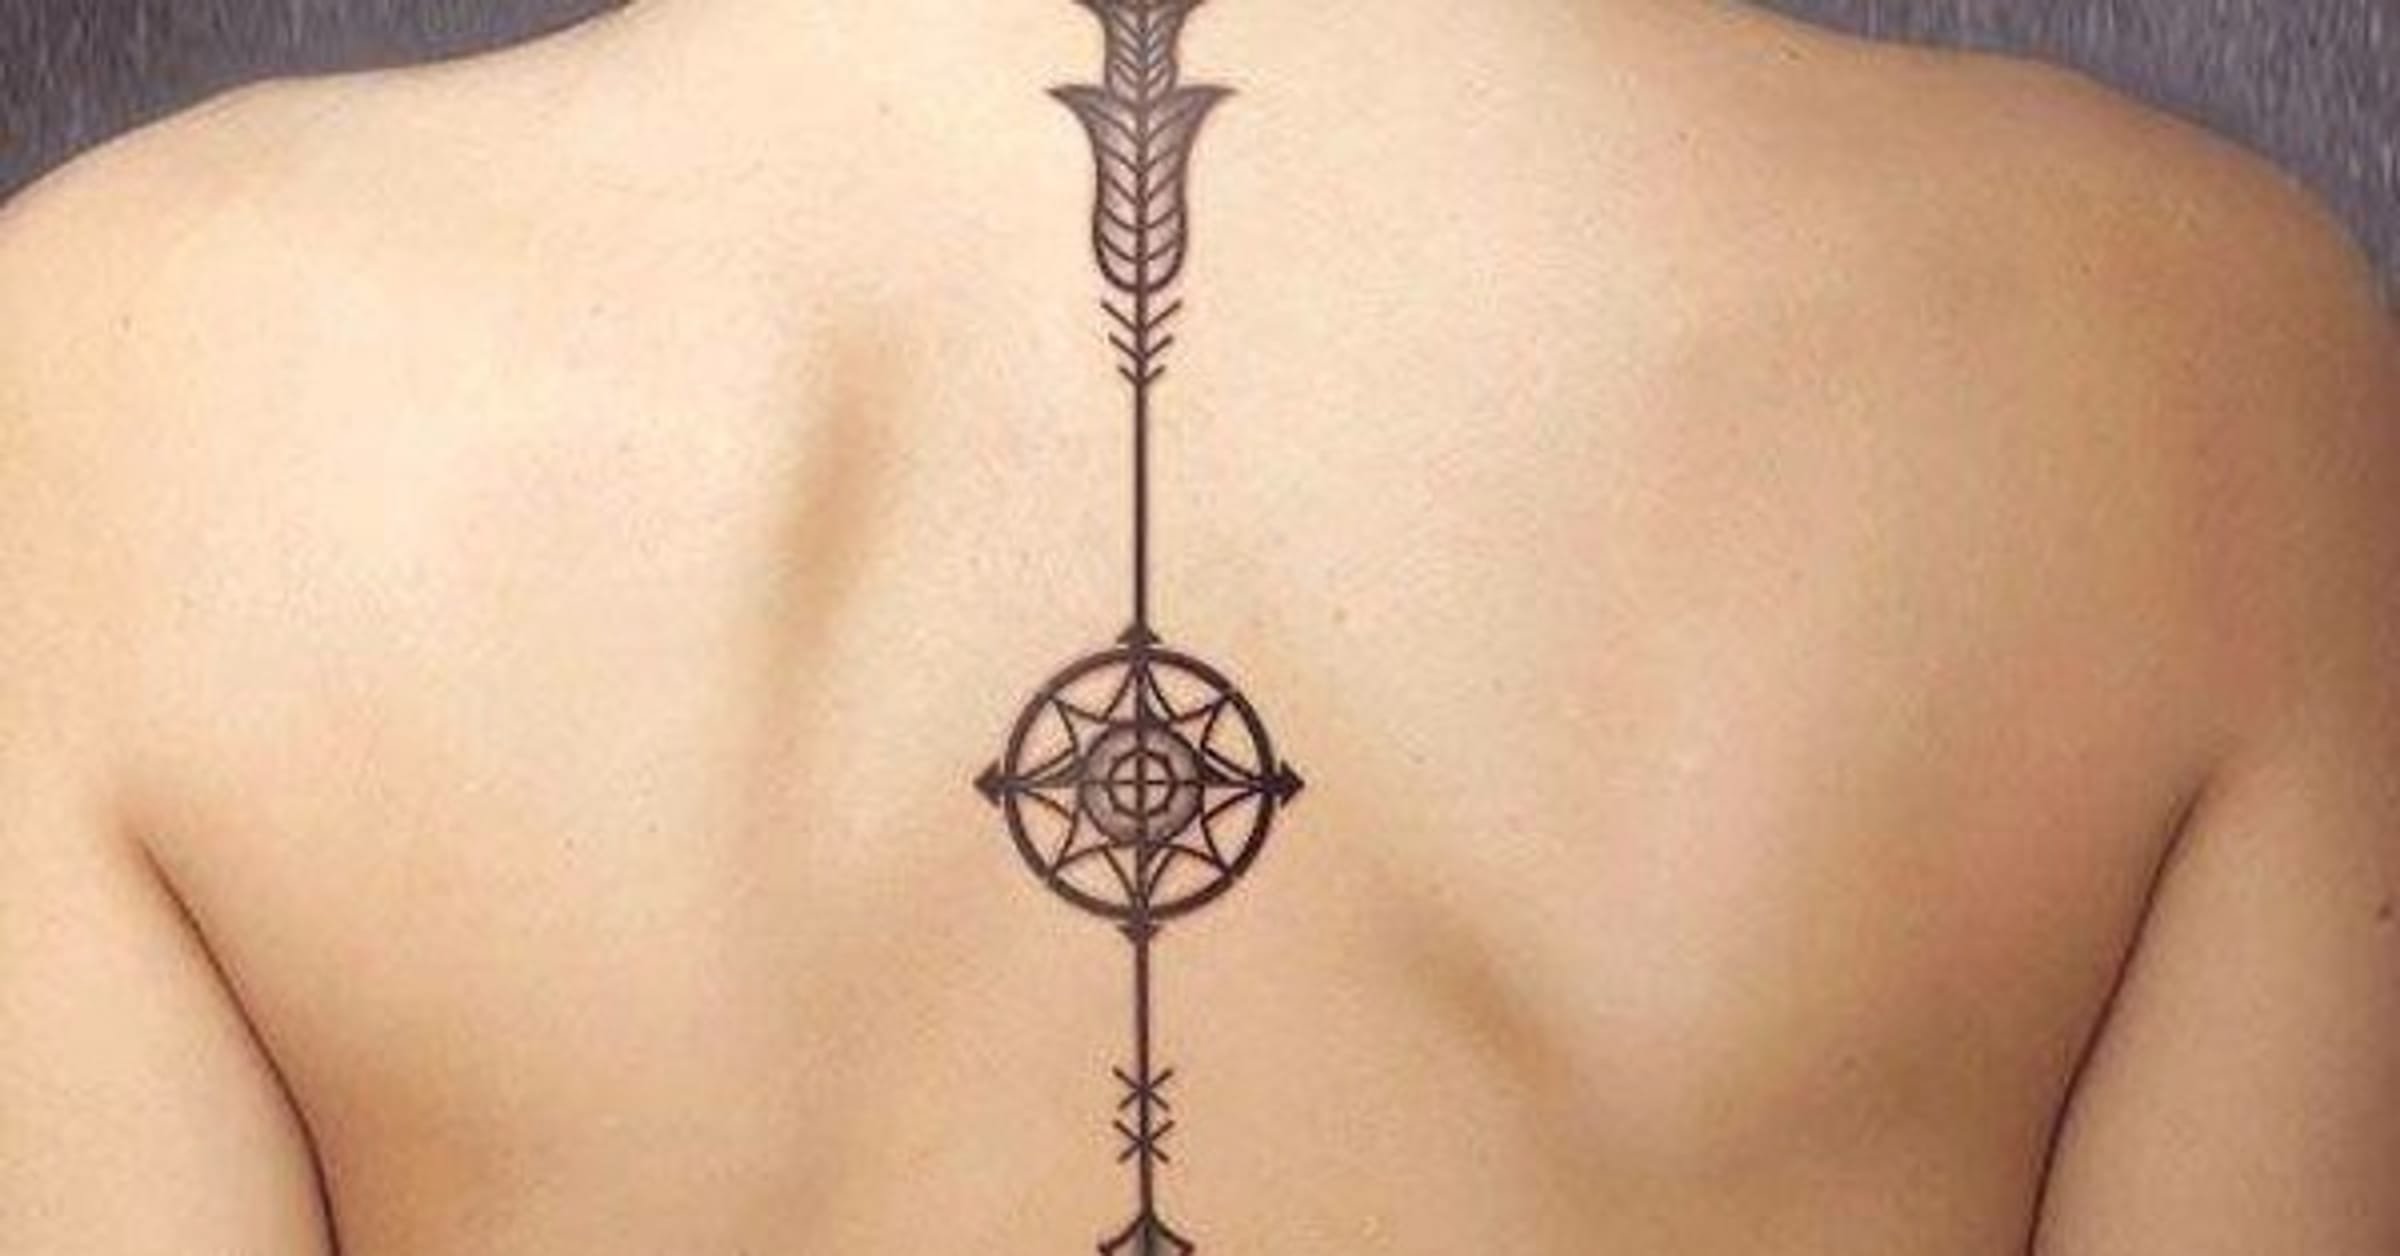 23 Awesome Upper Back Tattoos for Women  Upper back tattoos, Back tattoo  women, Back tattoo women upper